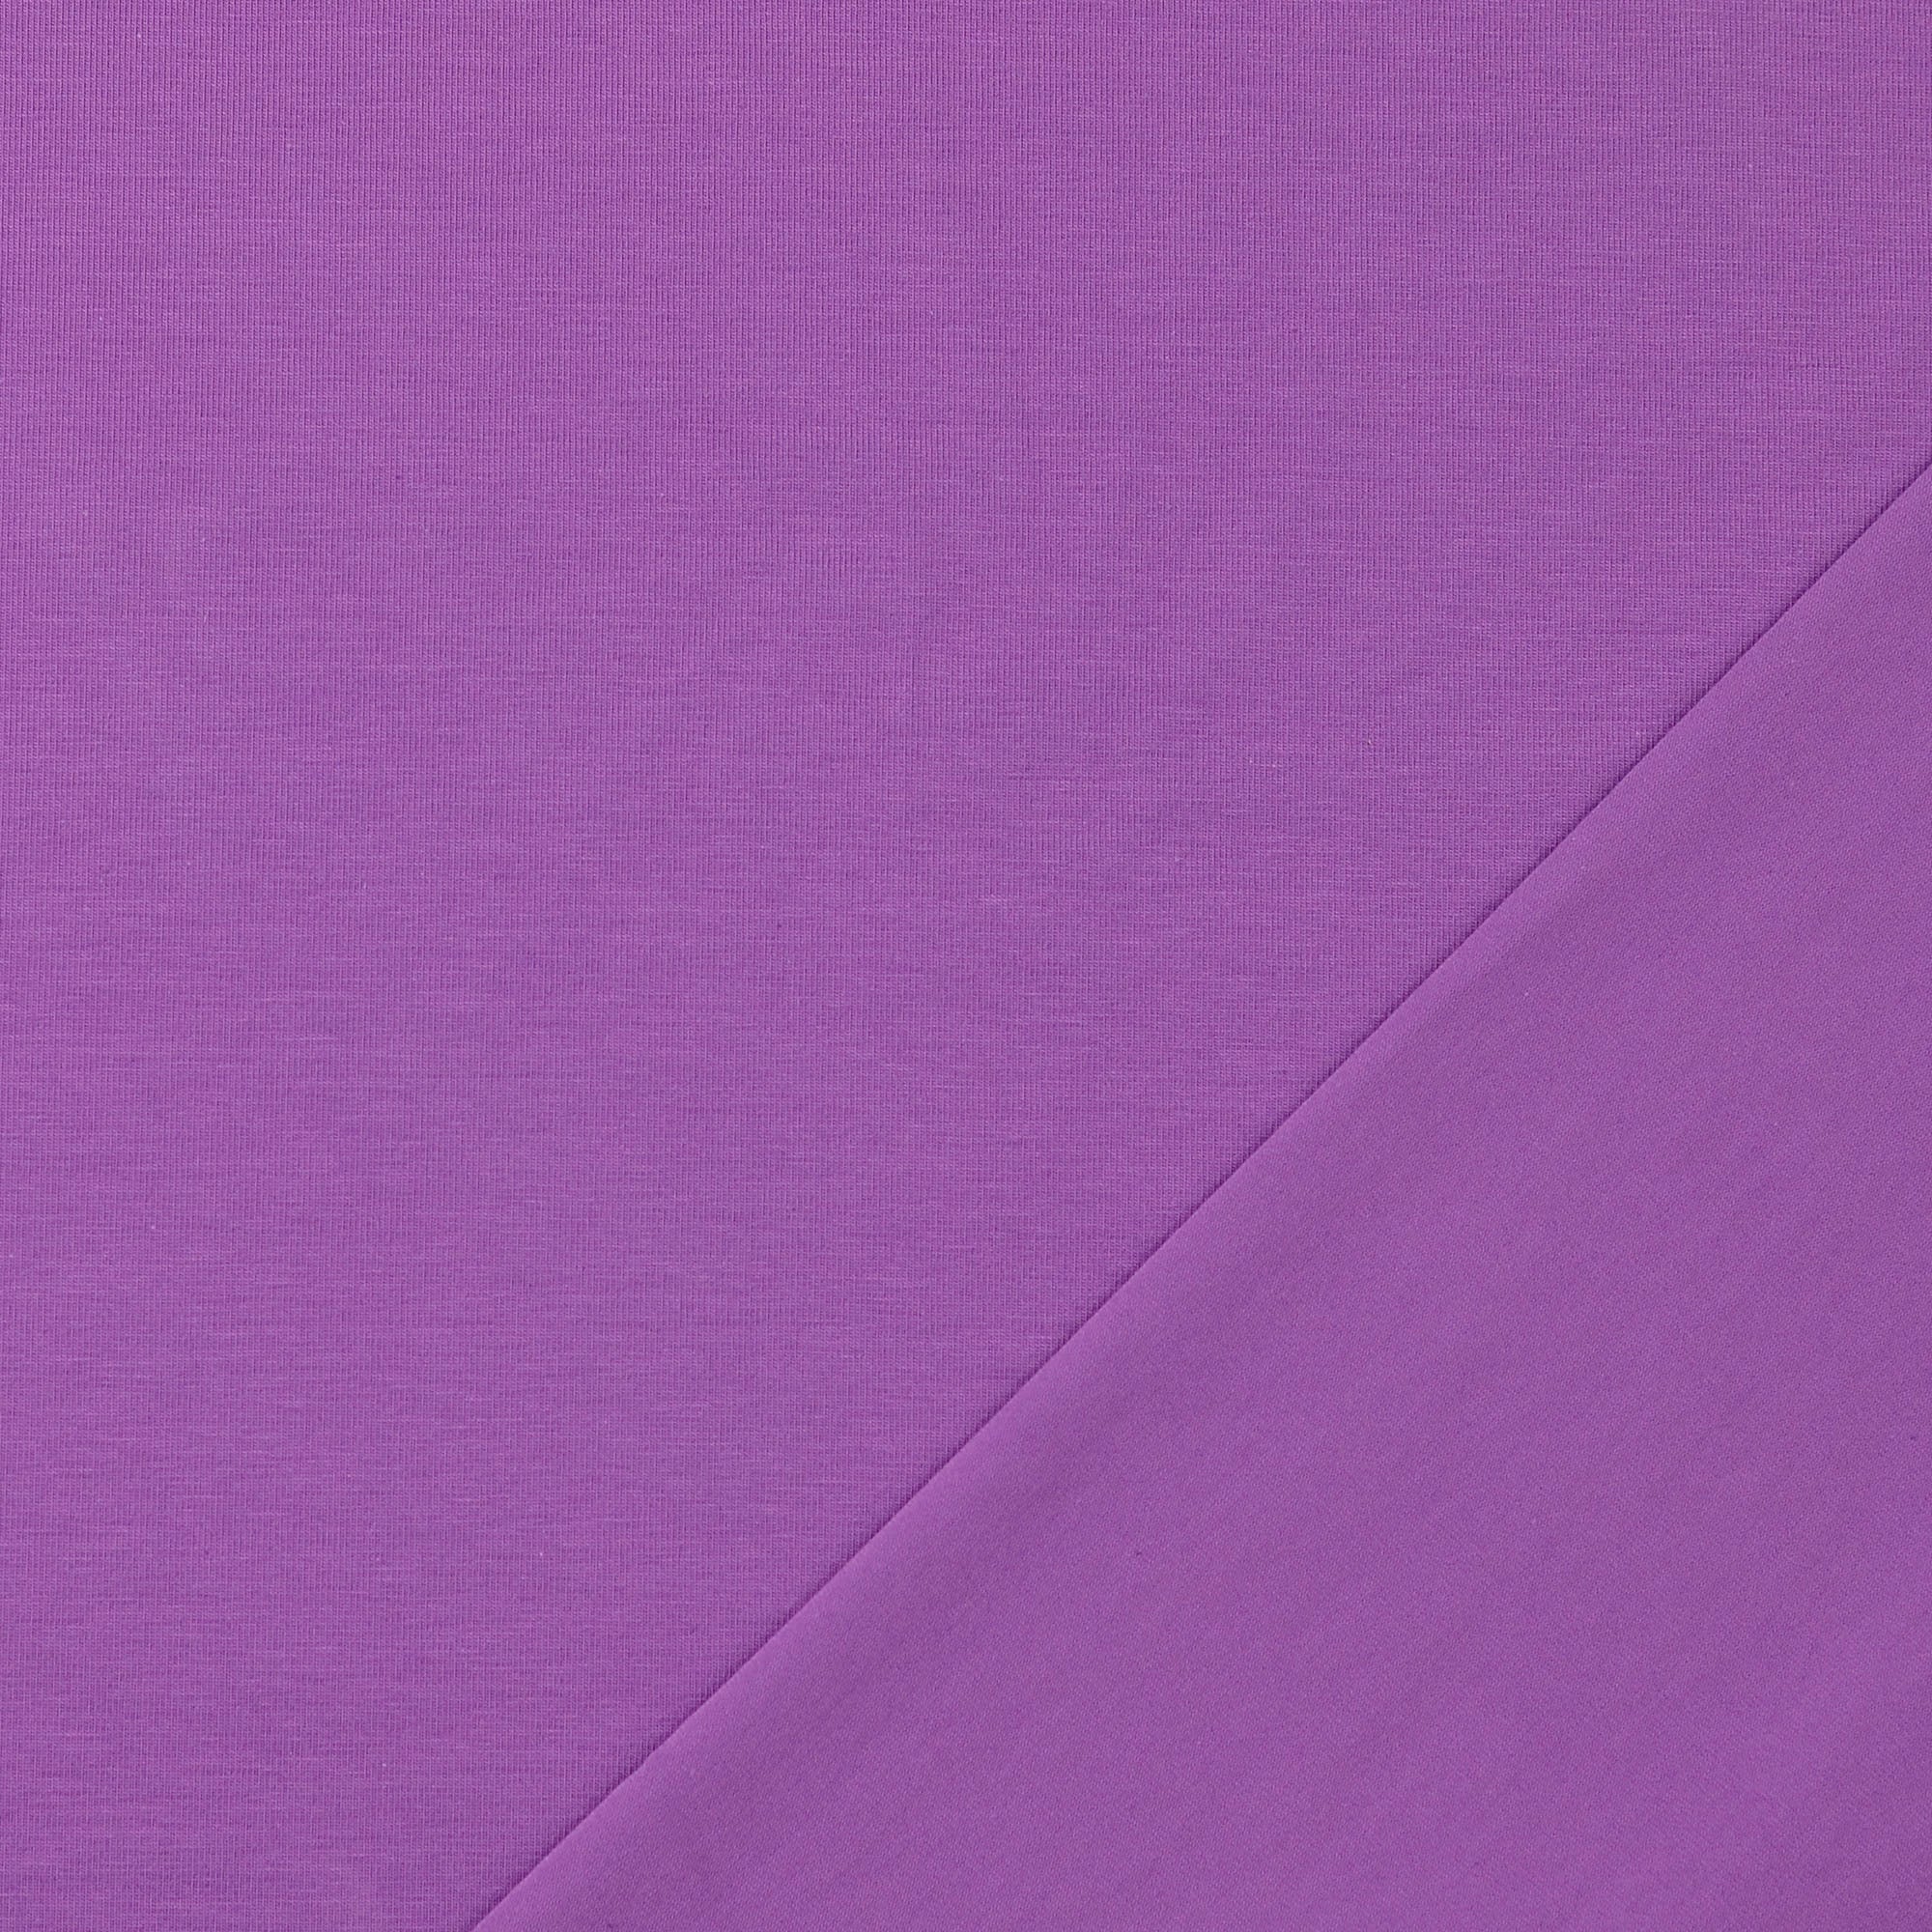 Essential Chic Lavender Cotton Jersey Fabric